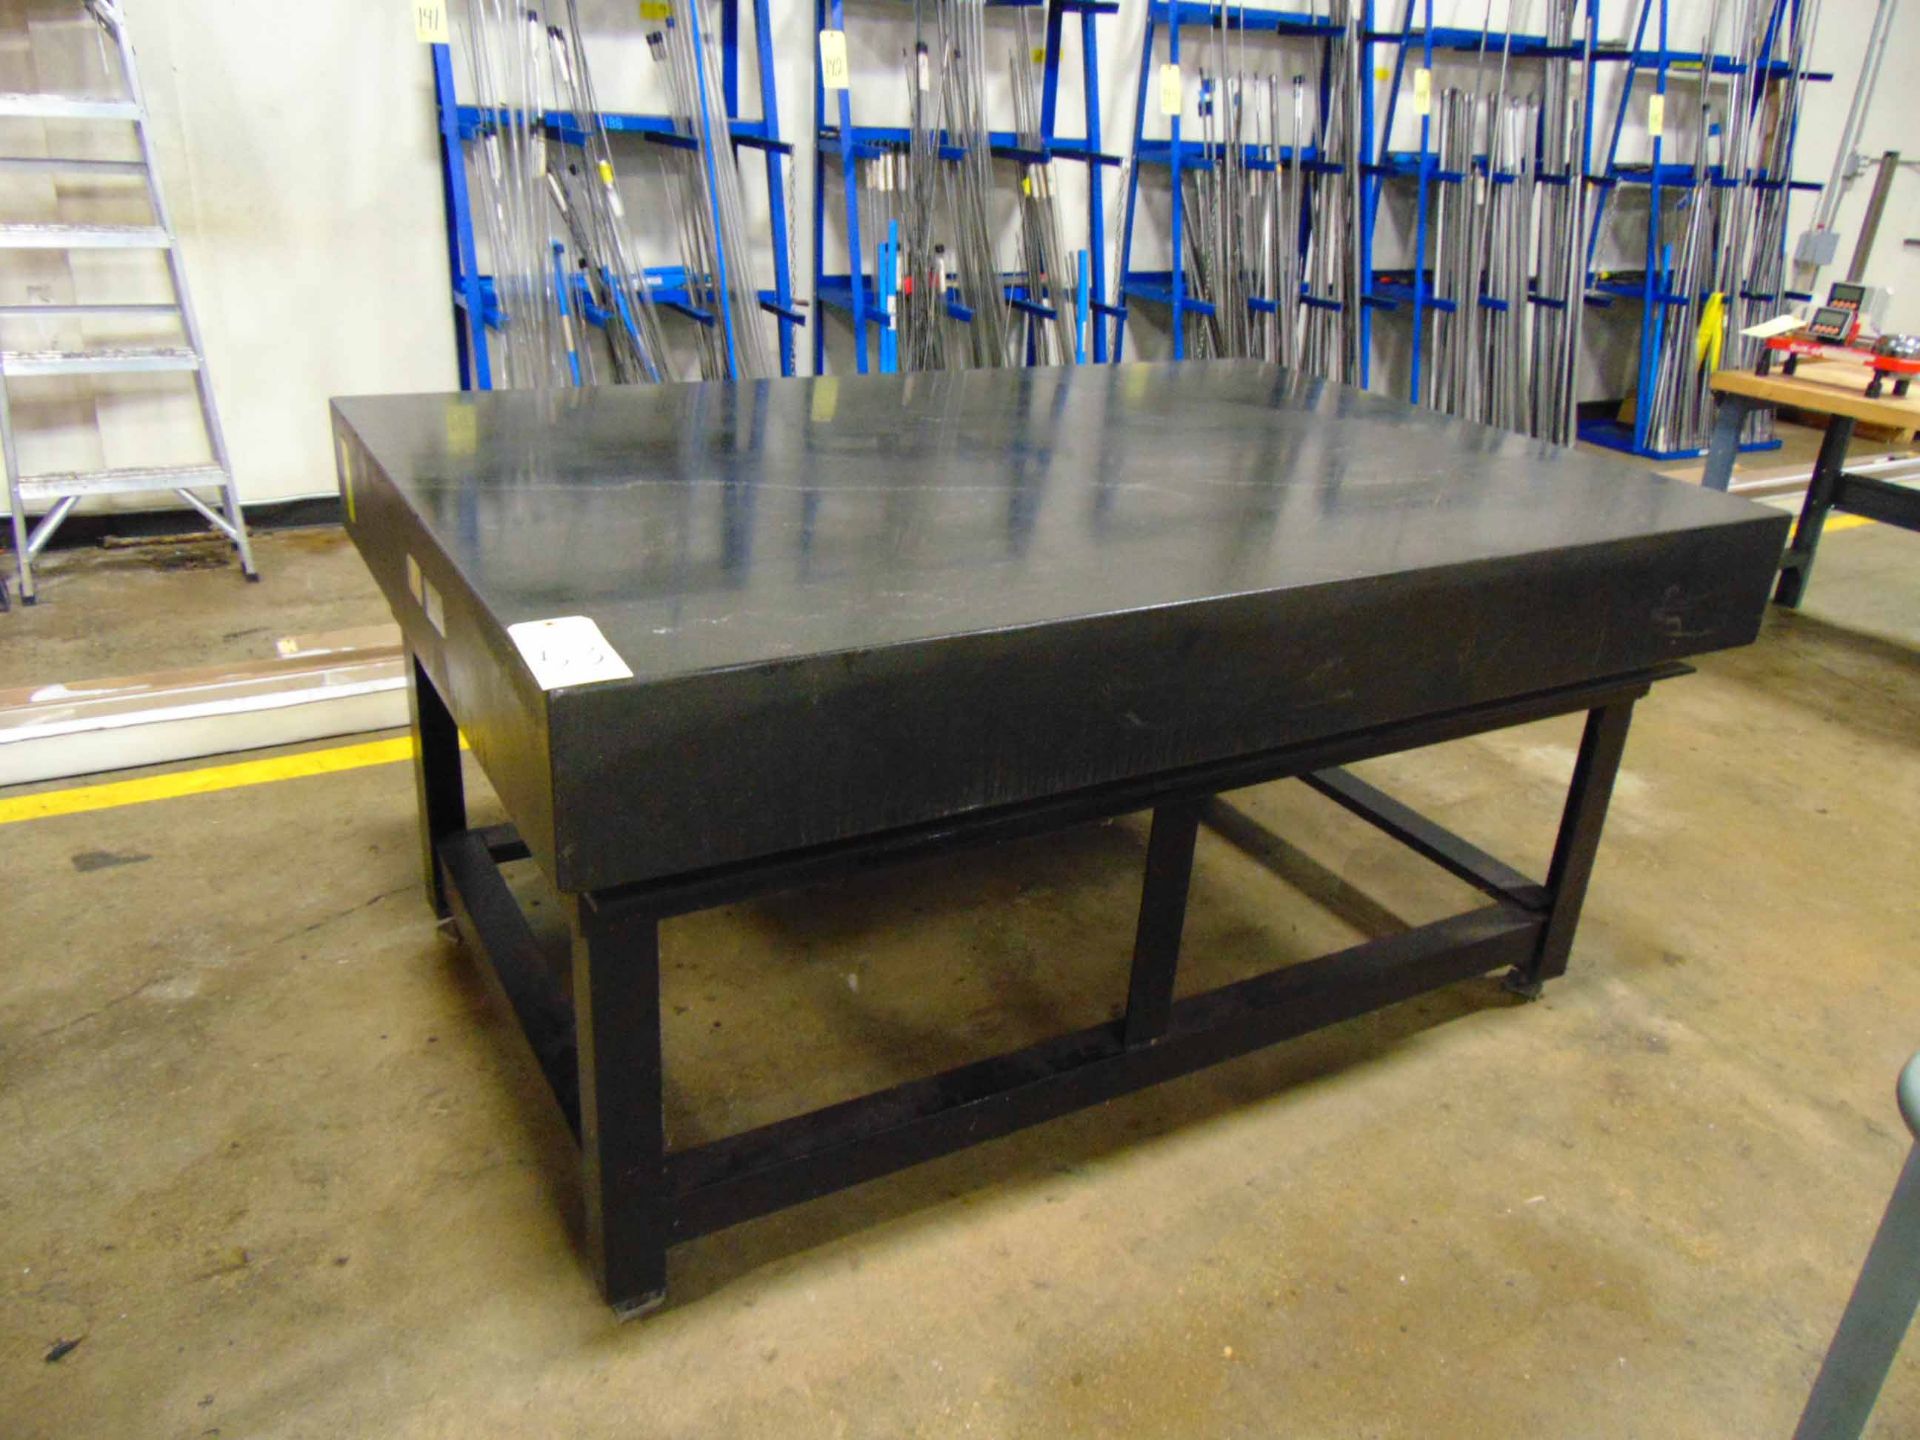 GRANITE SURFACE PLATE, 48” x 72” x 8” thk., Grade A, on fabricated steel stand - Image 2 of 3